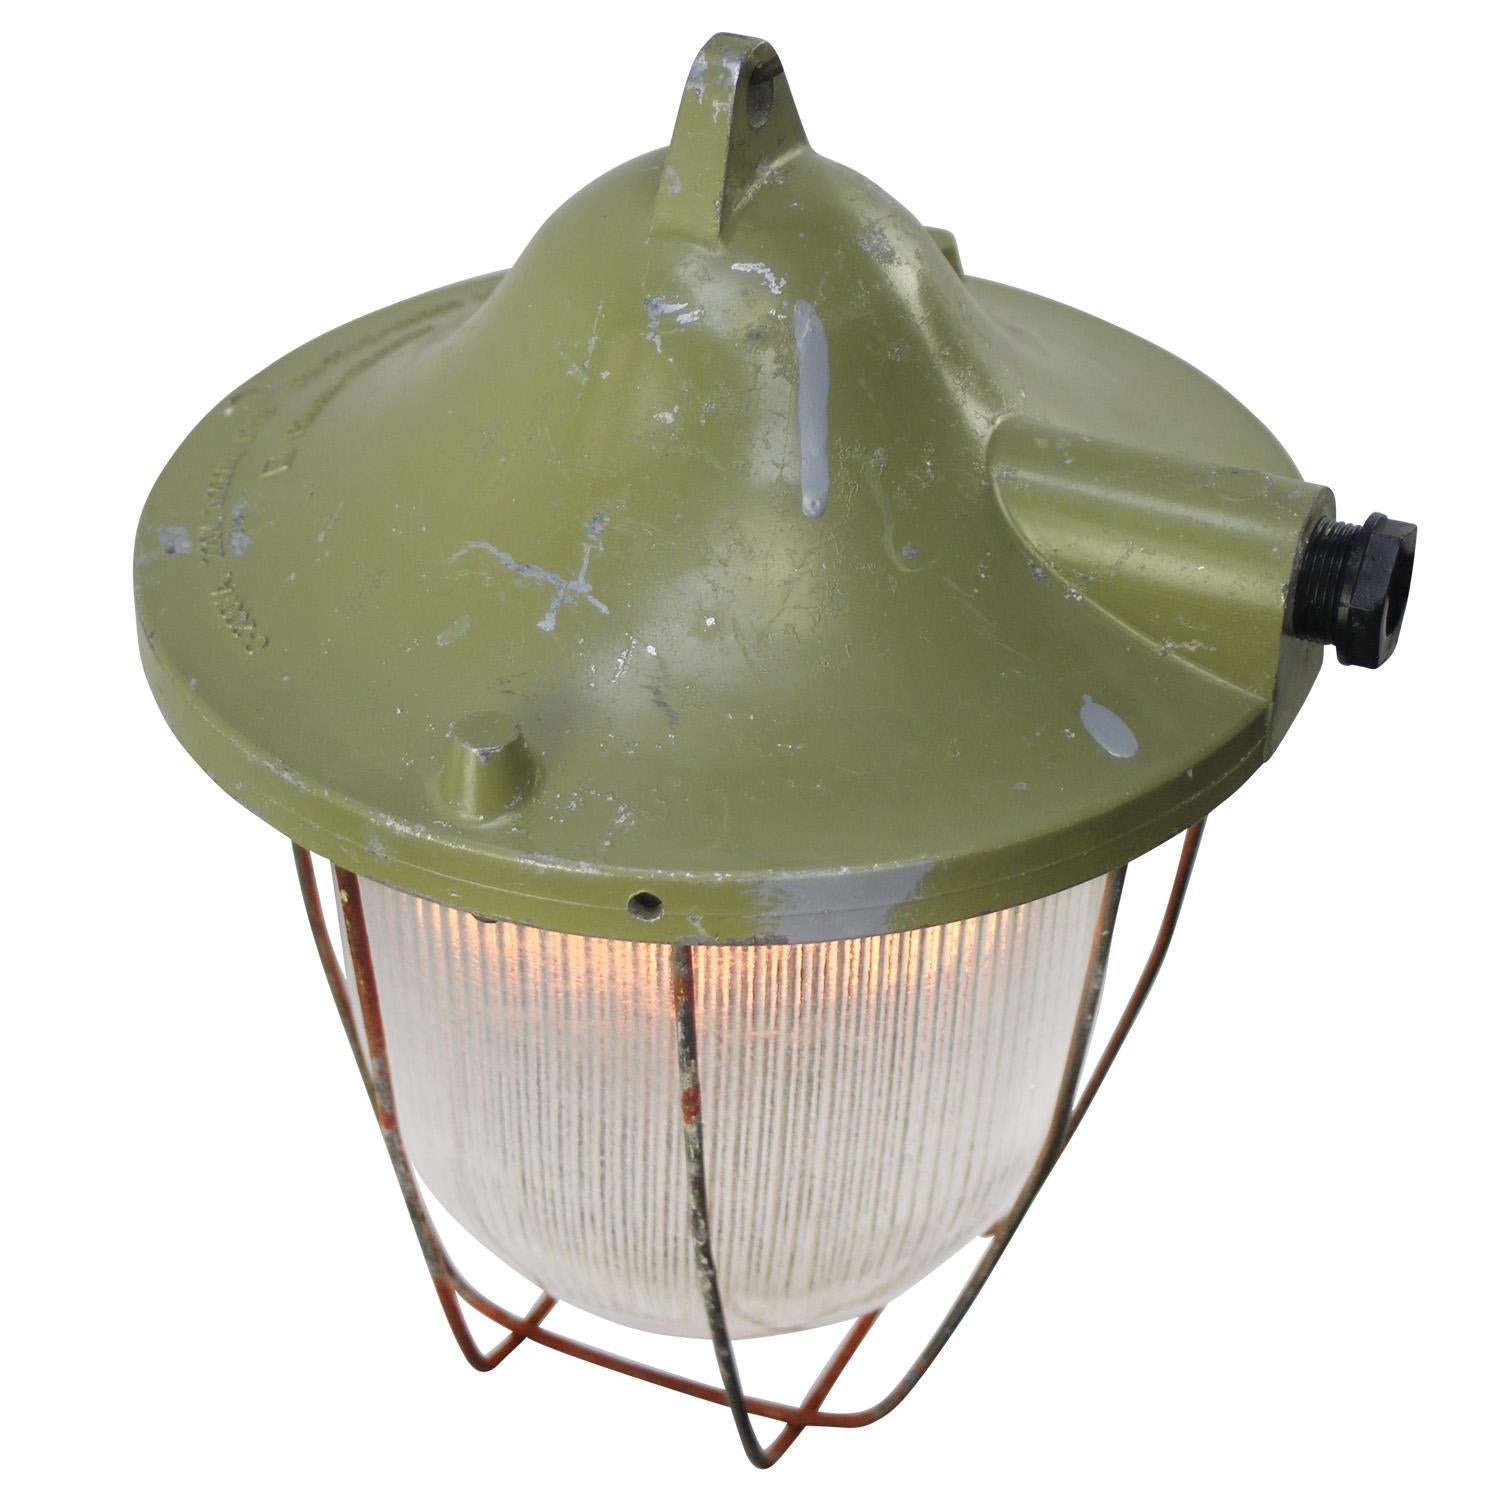 Industrial hanging lamp
clear striped glass
green cast aluminium top

Weight: 2.90 kg / 6.4 lb

Priced per individual item. All lamps have been made suitable by international standards for incandescent light bulbs, energy-efficient and LED bulbs.